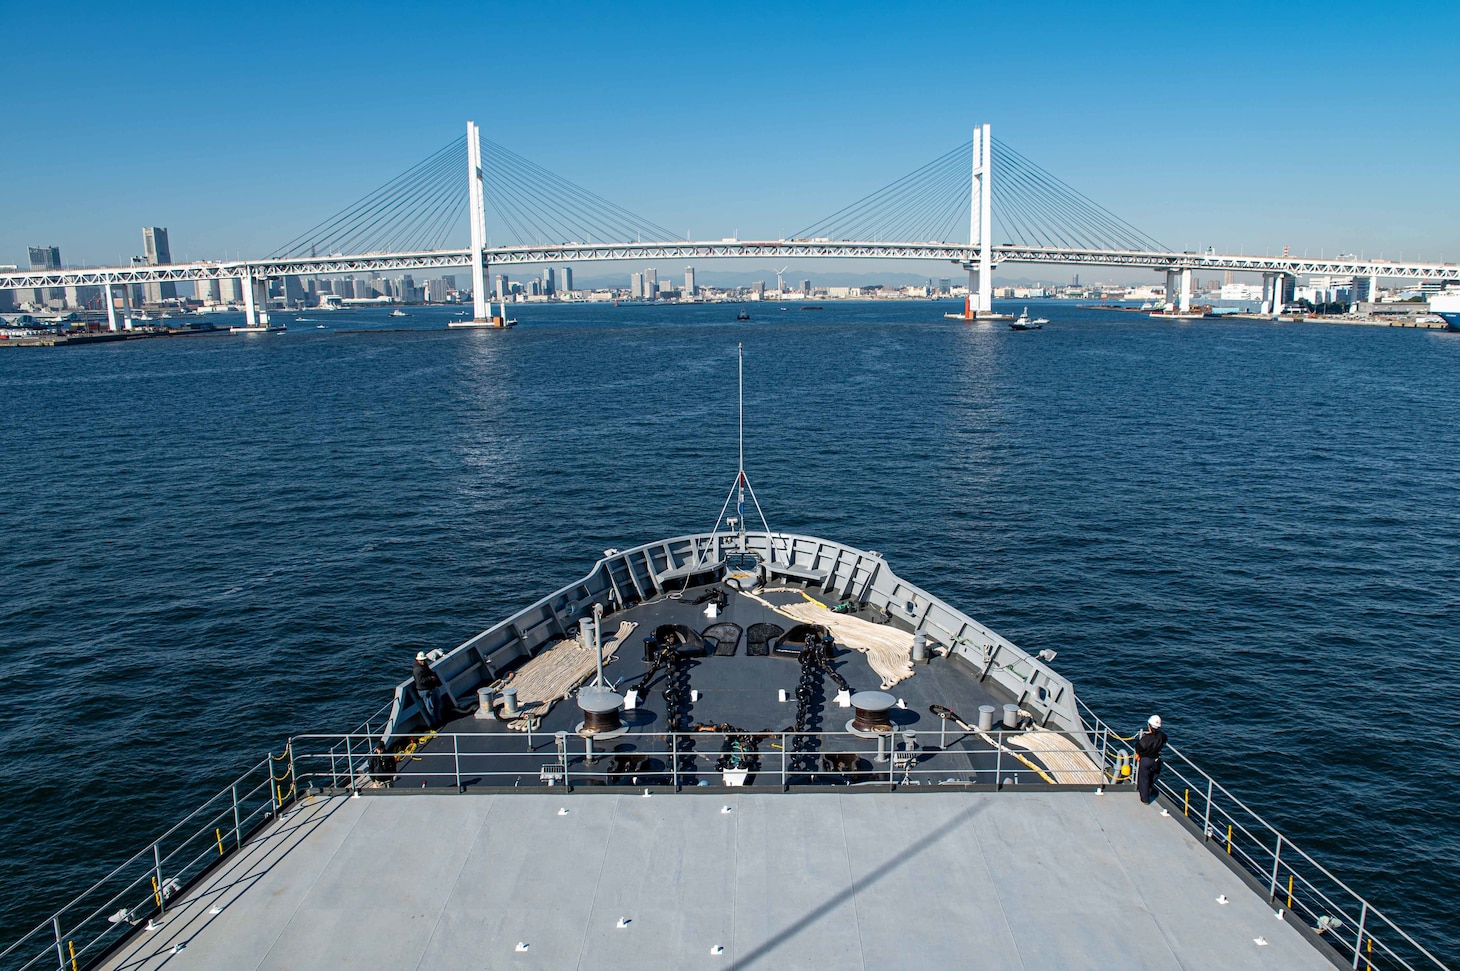 YOKOHAMA, Japan (Nov. 15, 2021) The Emory S. Land-class submarine tender USS Frank Cable (AS 40) approaches the Yokohama Bay Bridge. Frank Cable is on patrol conducting expeditionary maintenance and logistics in support of national security in the U.S. 7th Fleet area of operations. (U.S. Navy photo by Mass Communication Specialist 1st Class Charlotte C. Oliver/Released)